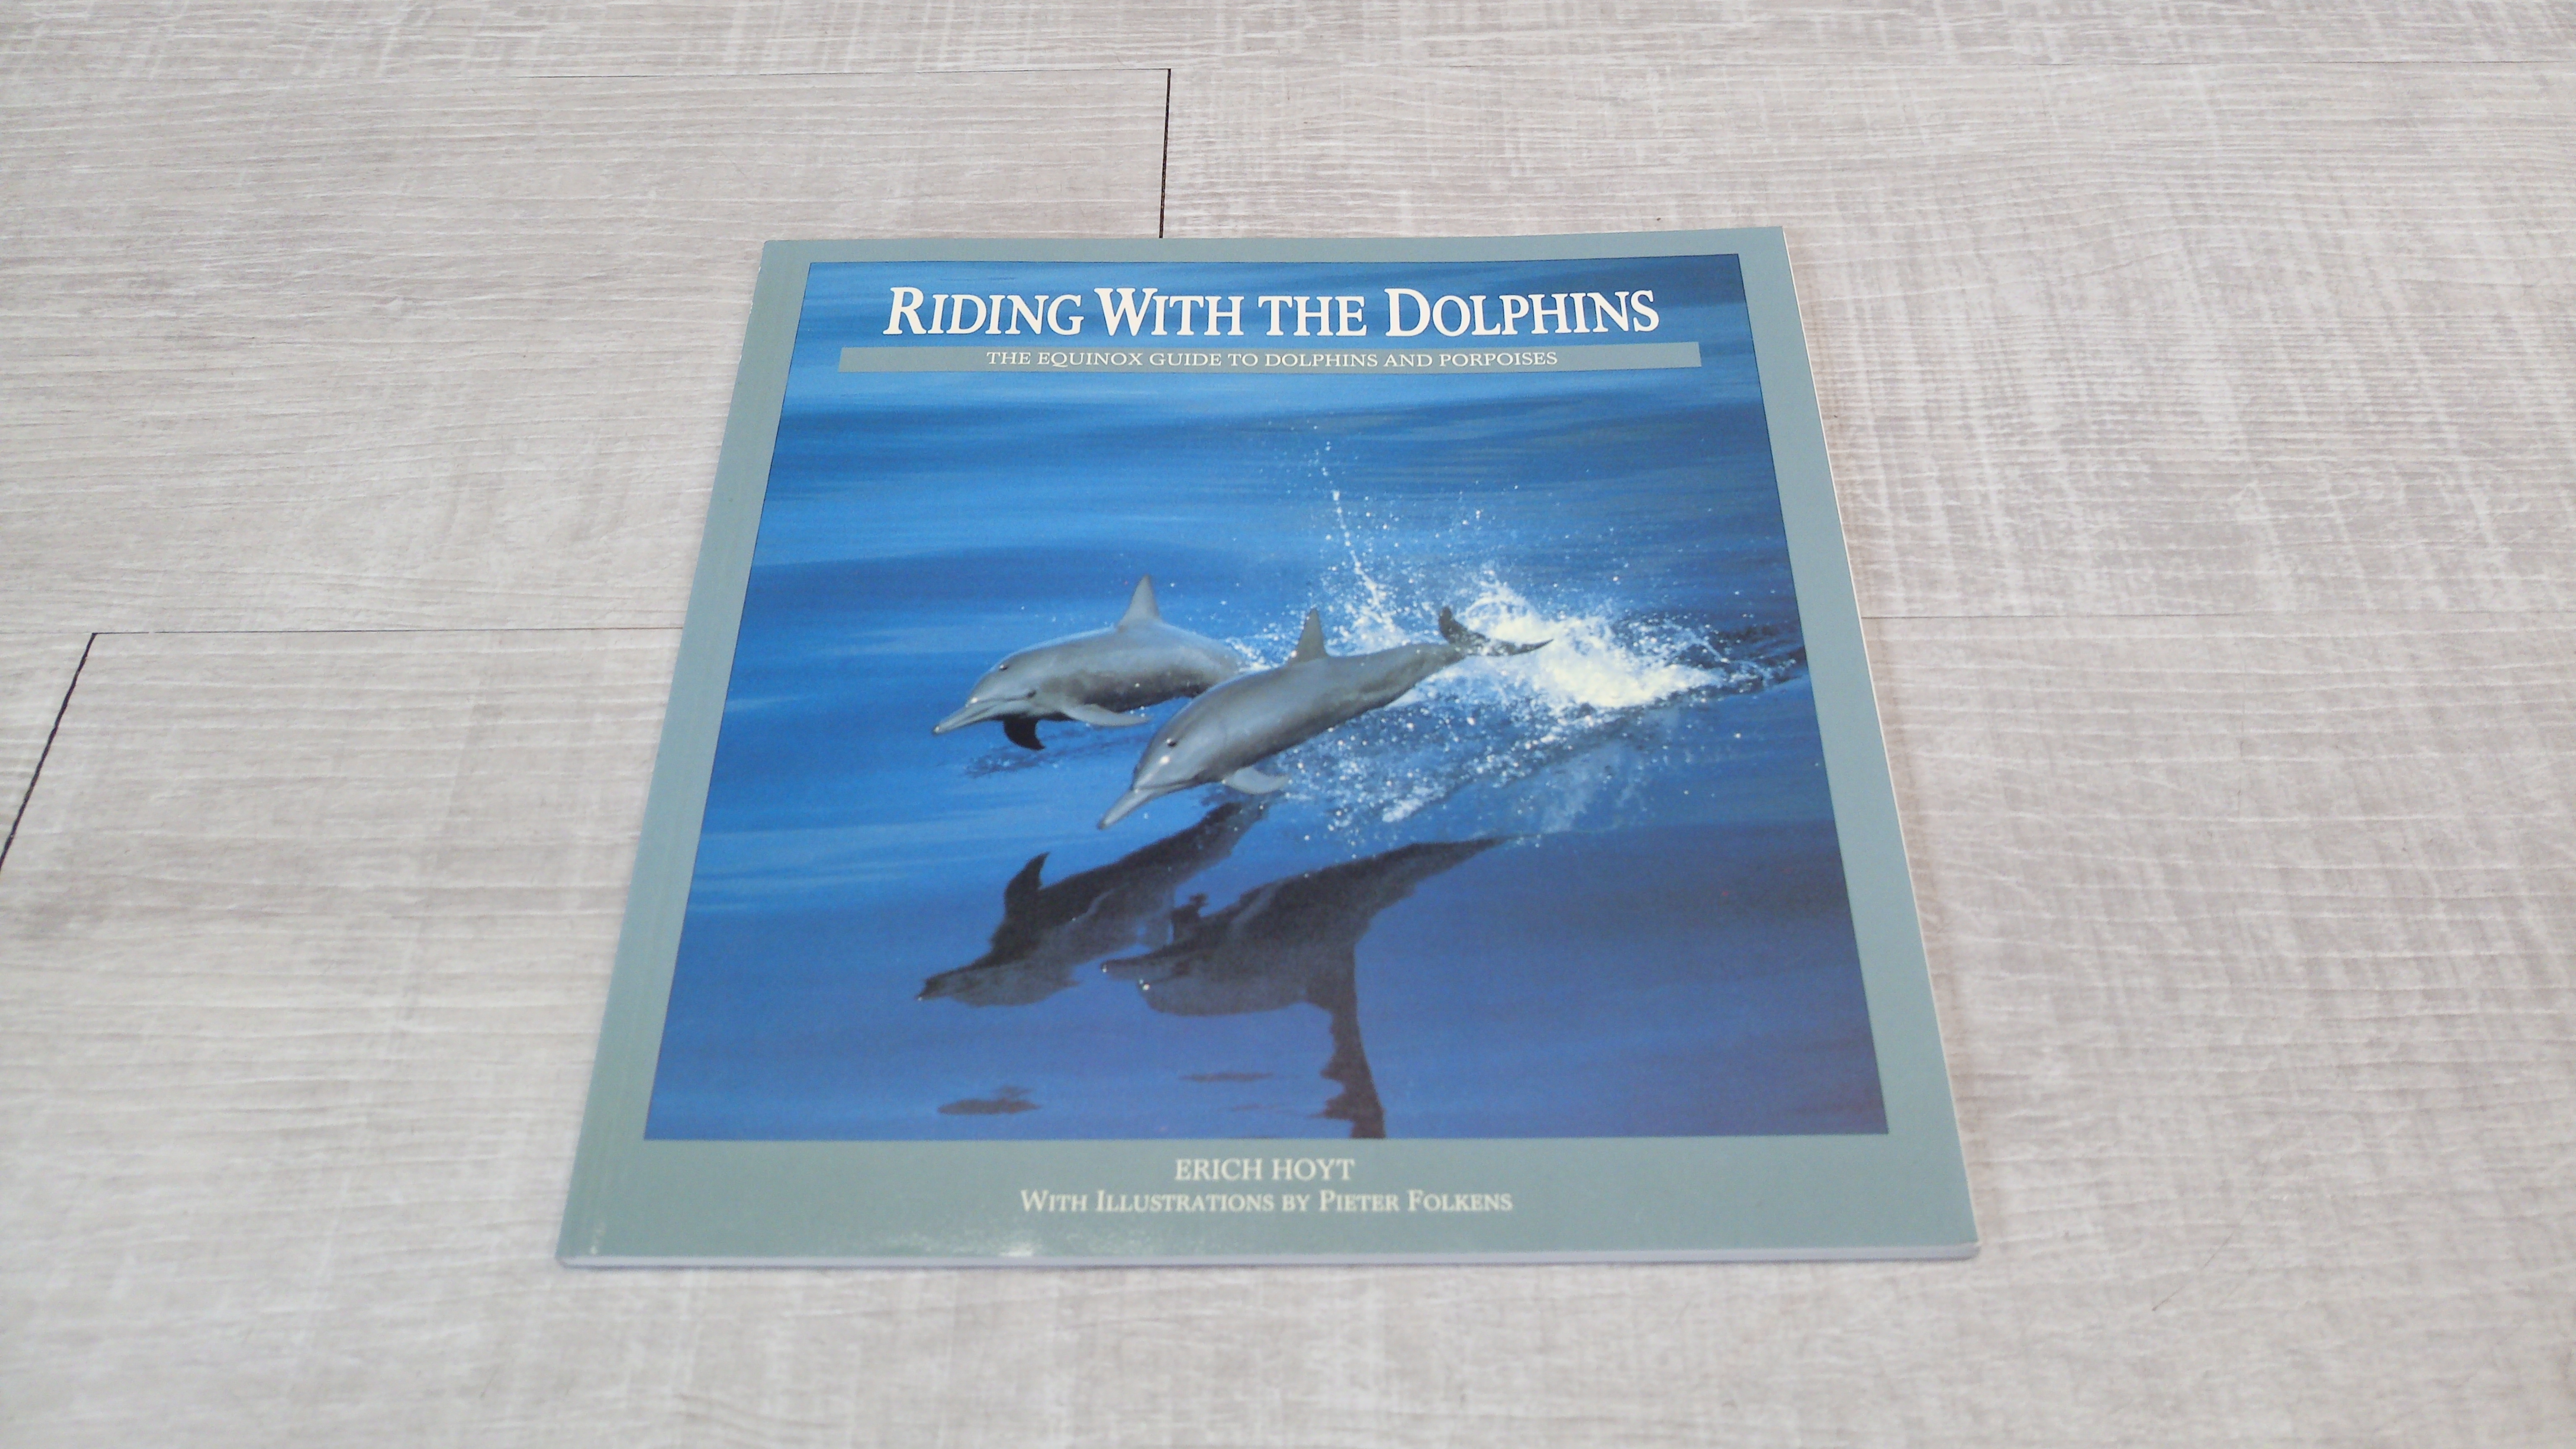 Riding with the dolphins